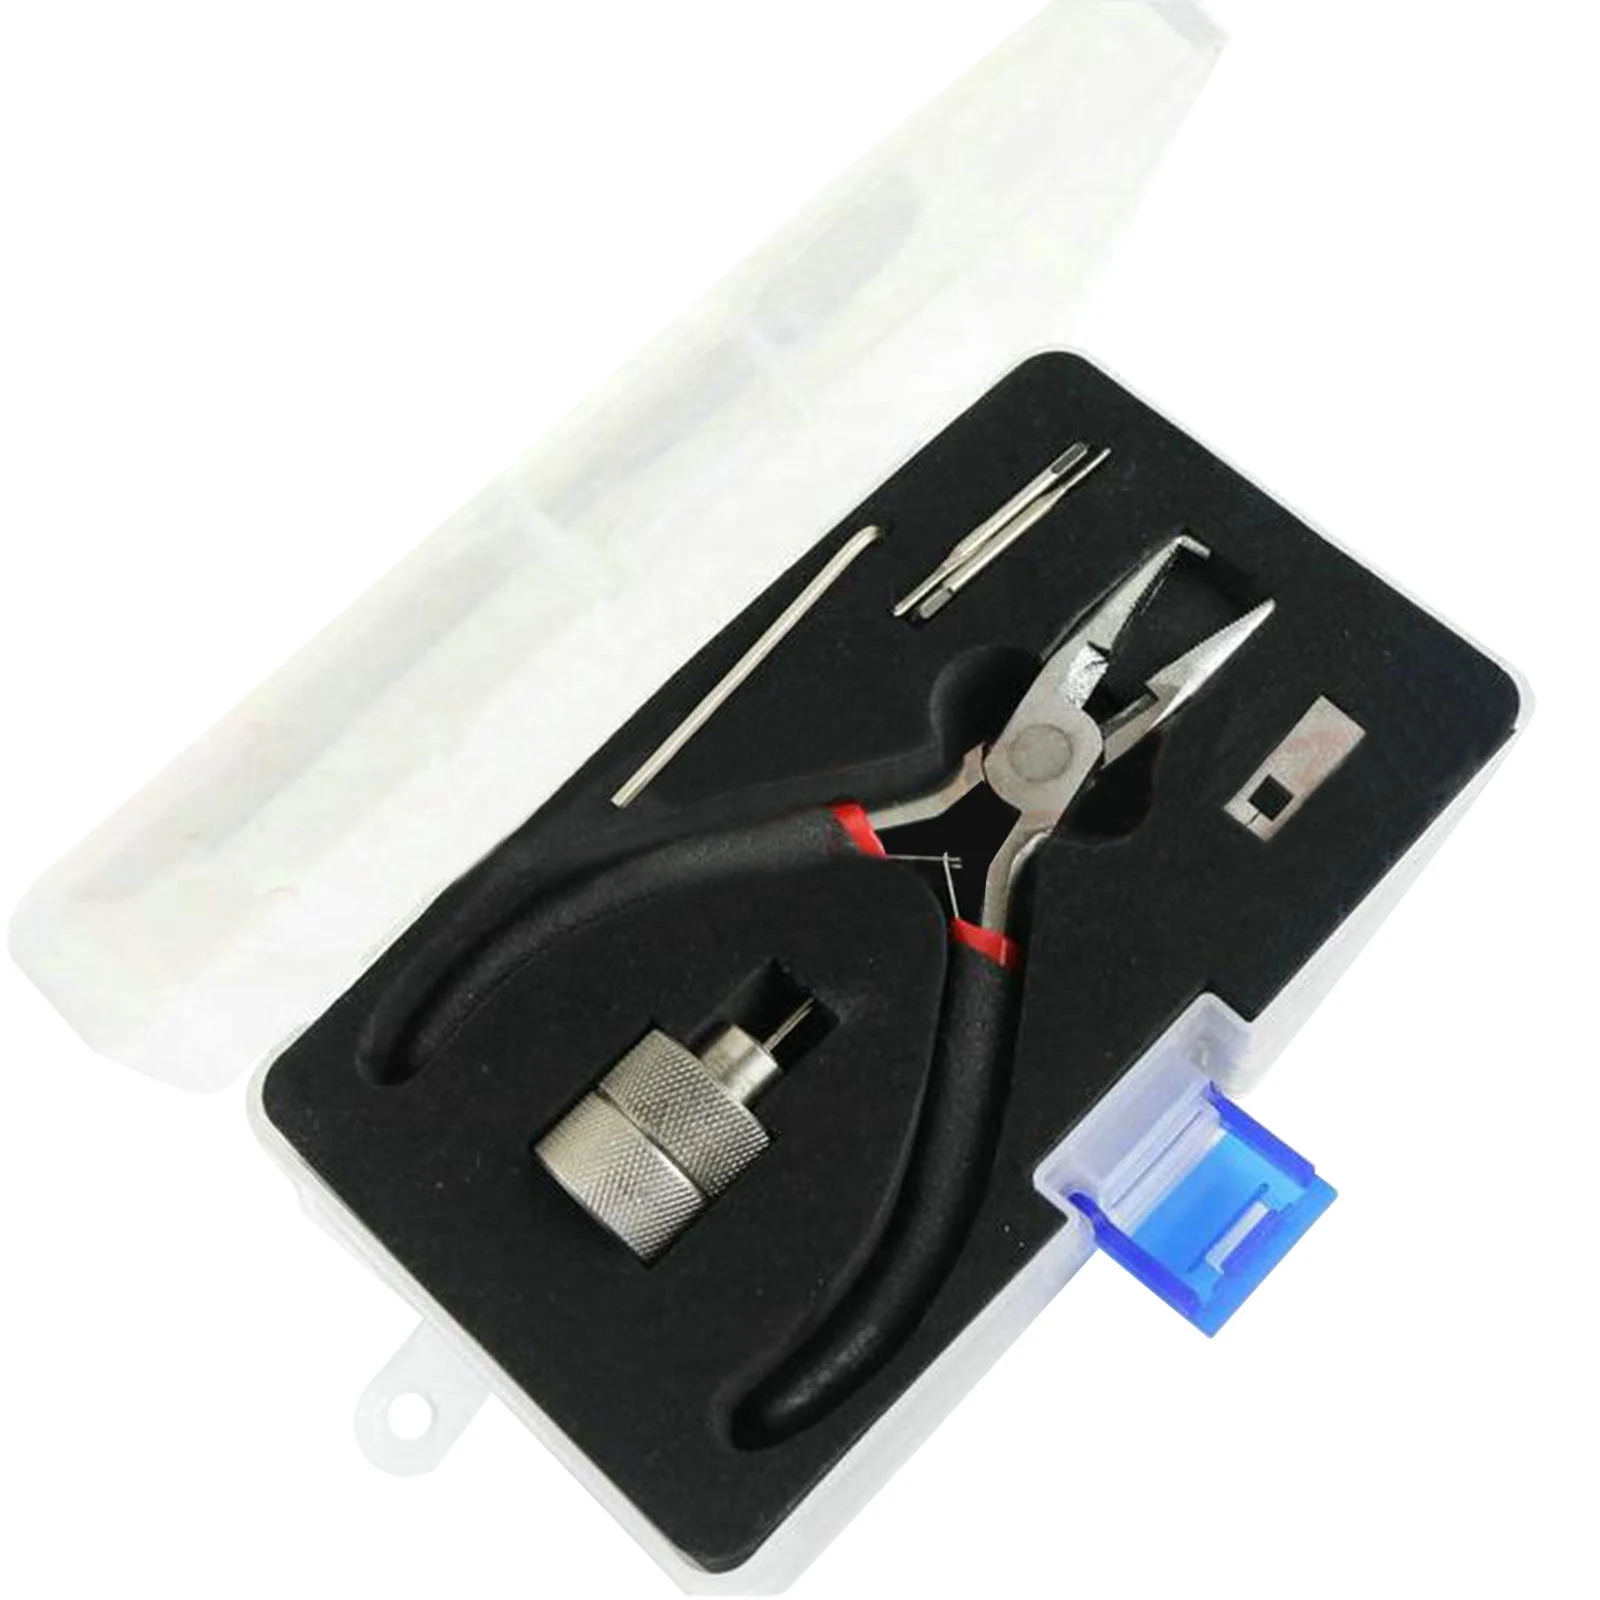  aqxreight - Ignition Lock Dowel Pin Removal Tool Kit